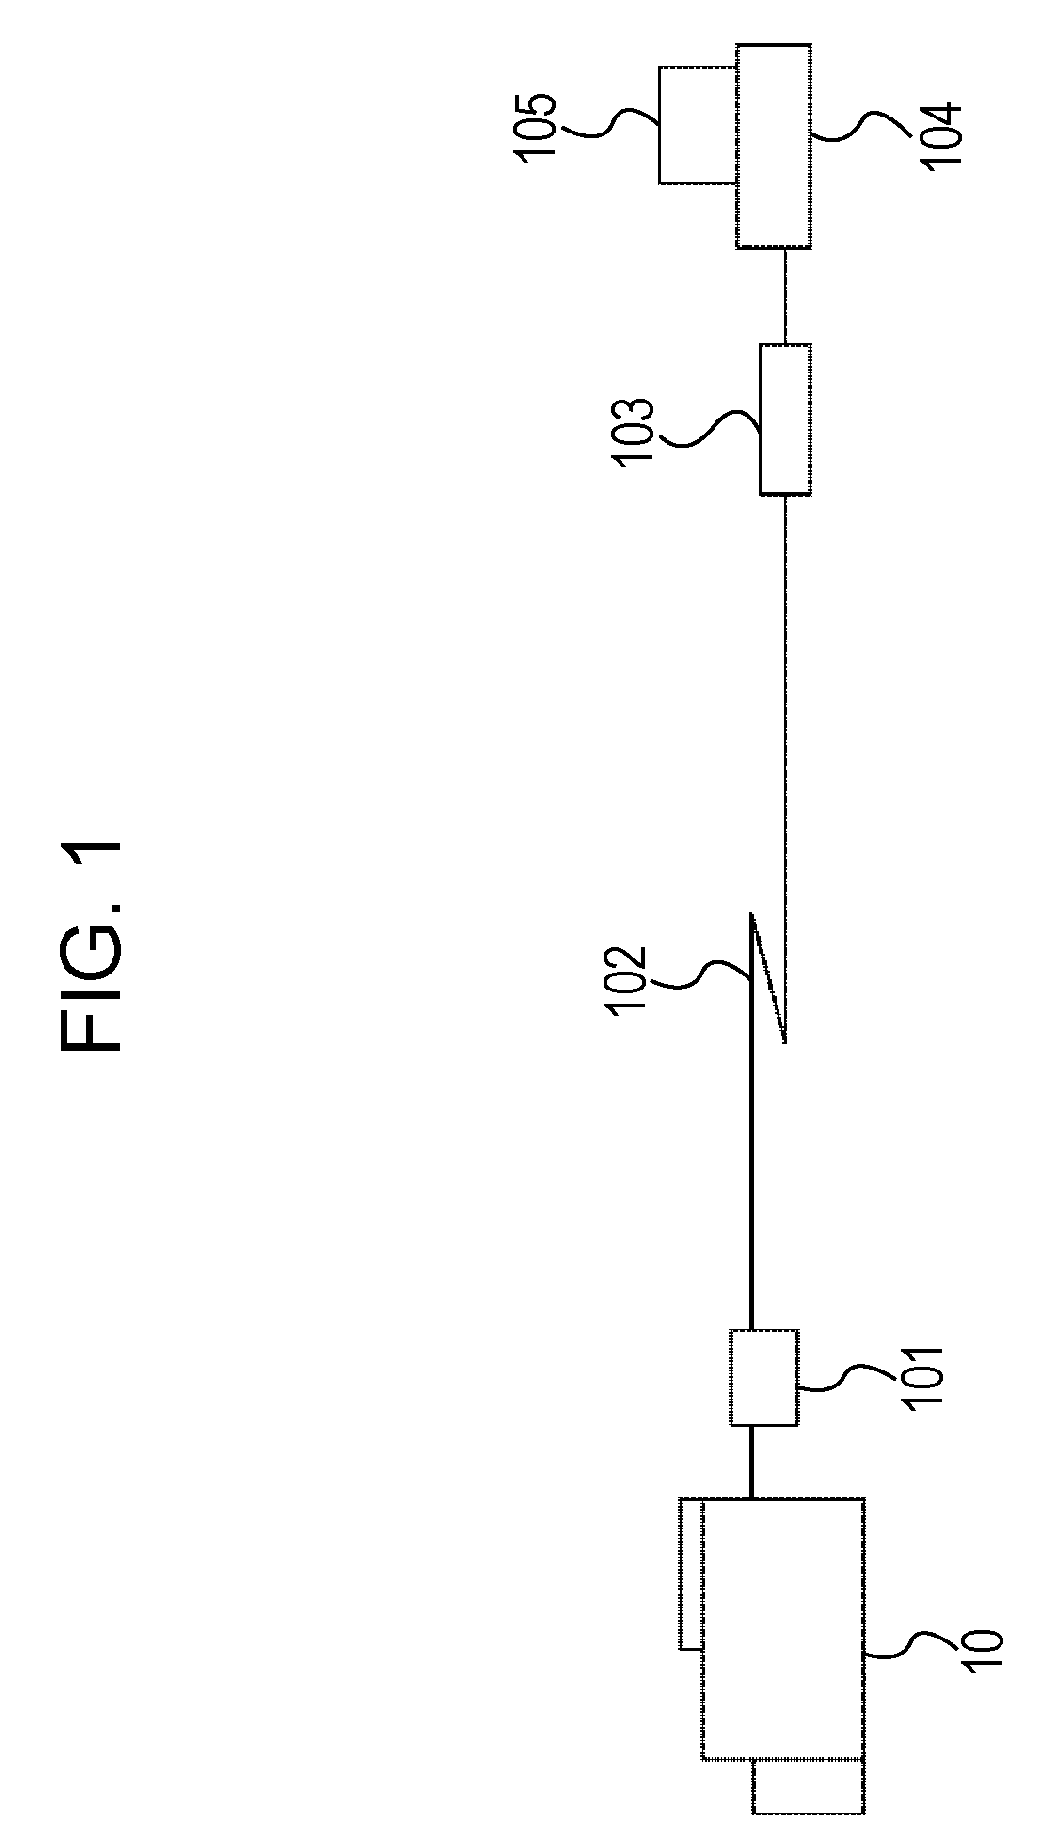 Image forming apparatus, image forming system, and method of controlling the image forming apparatus